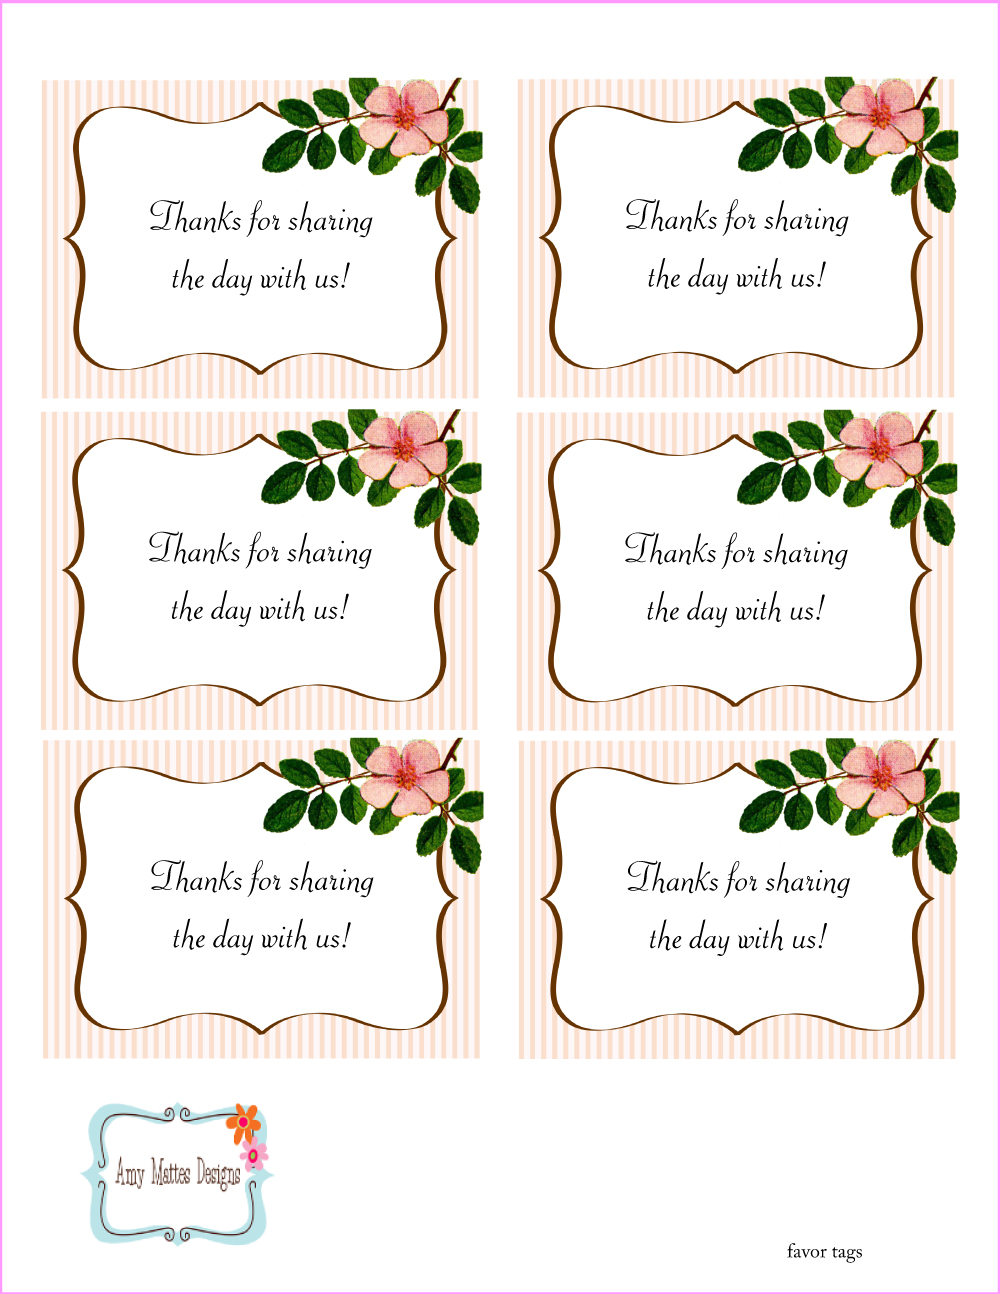 FREE Mother s Day Printables From Amy Mattes Designs Catch My Party